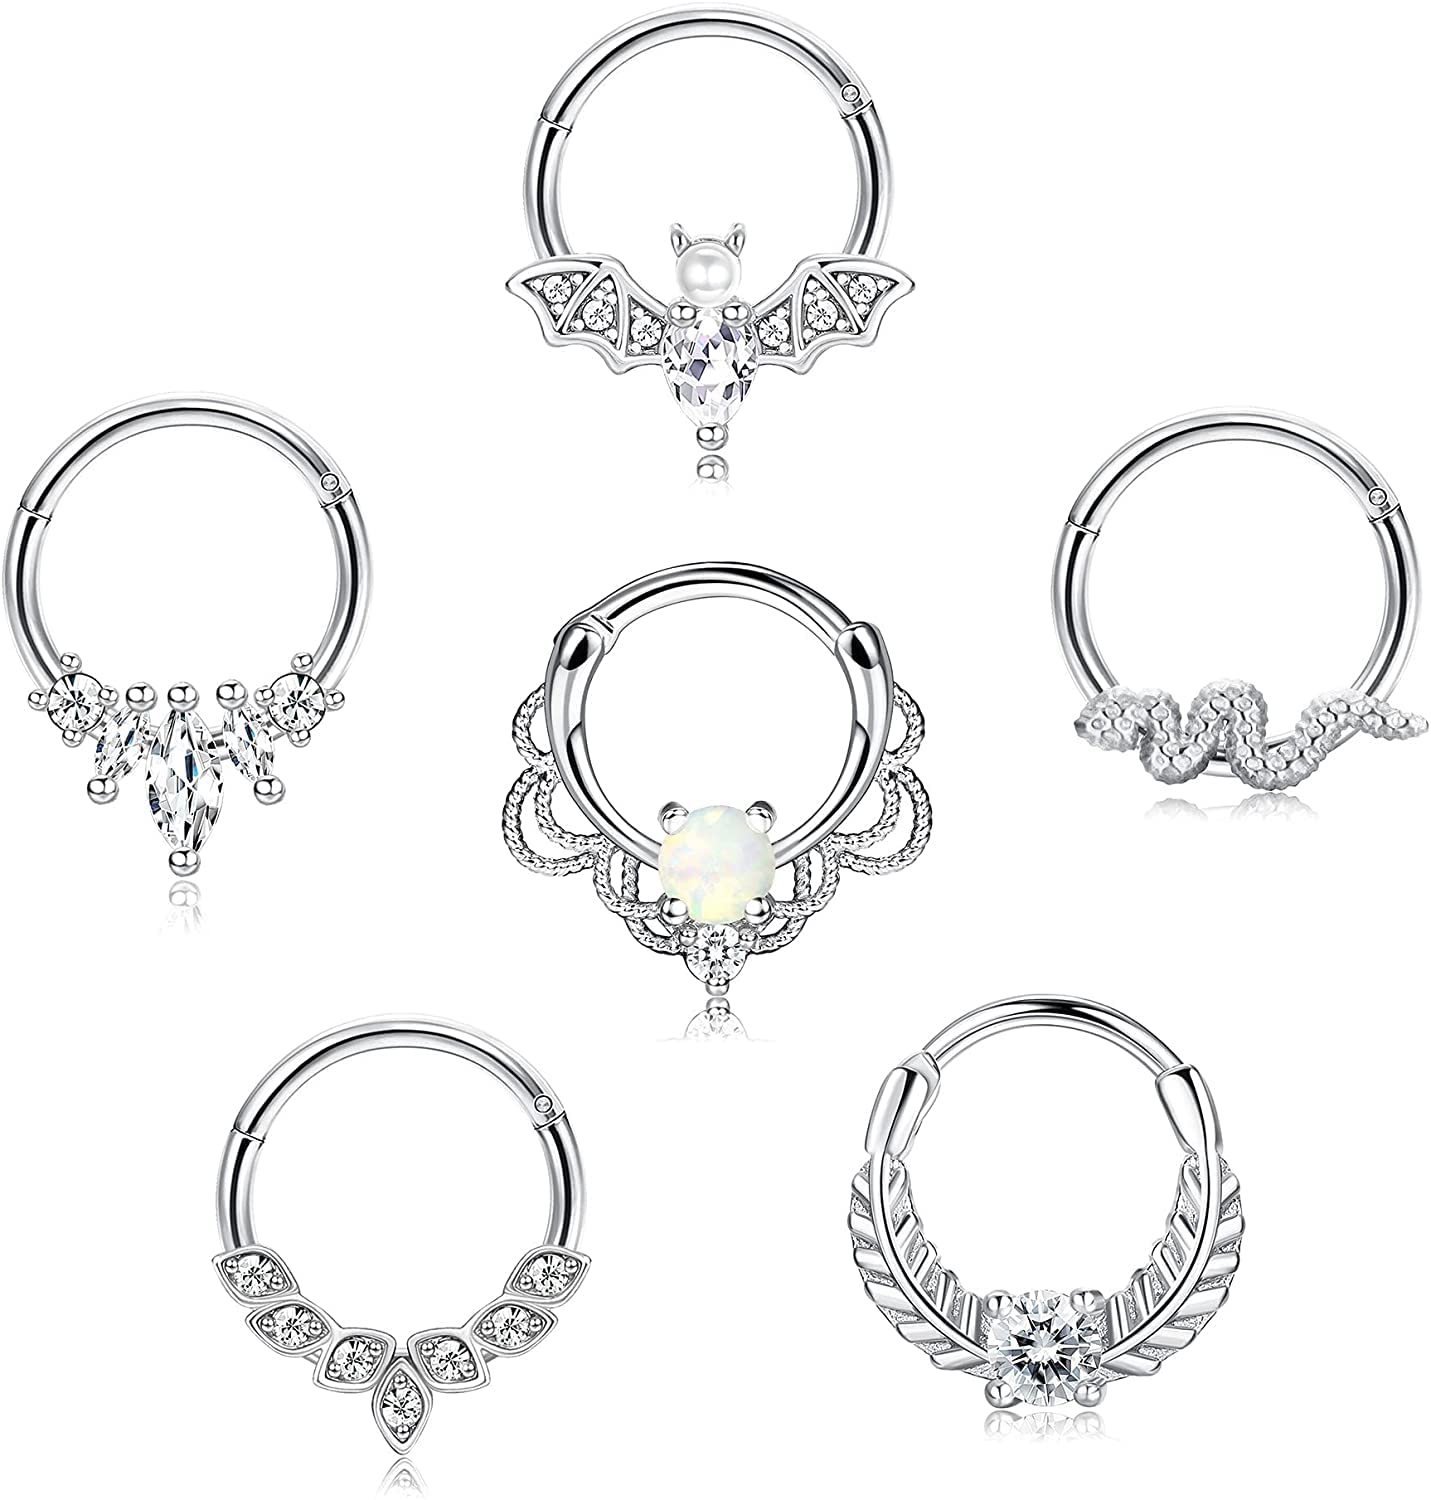 LOLIAS 6Pcs 16G Hinged Nose Septum Stainless Steel Opal CZ Cartilage Daith Earrings Helix Tragus Ring Clicker Set 8mm/10mm Bat Jewels Centered Hinged Ring Piercing Jewellery